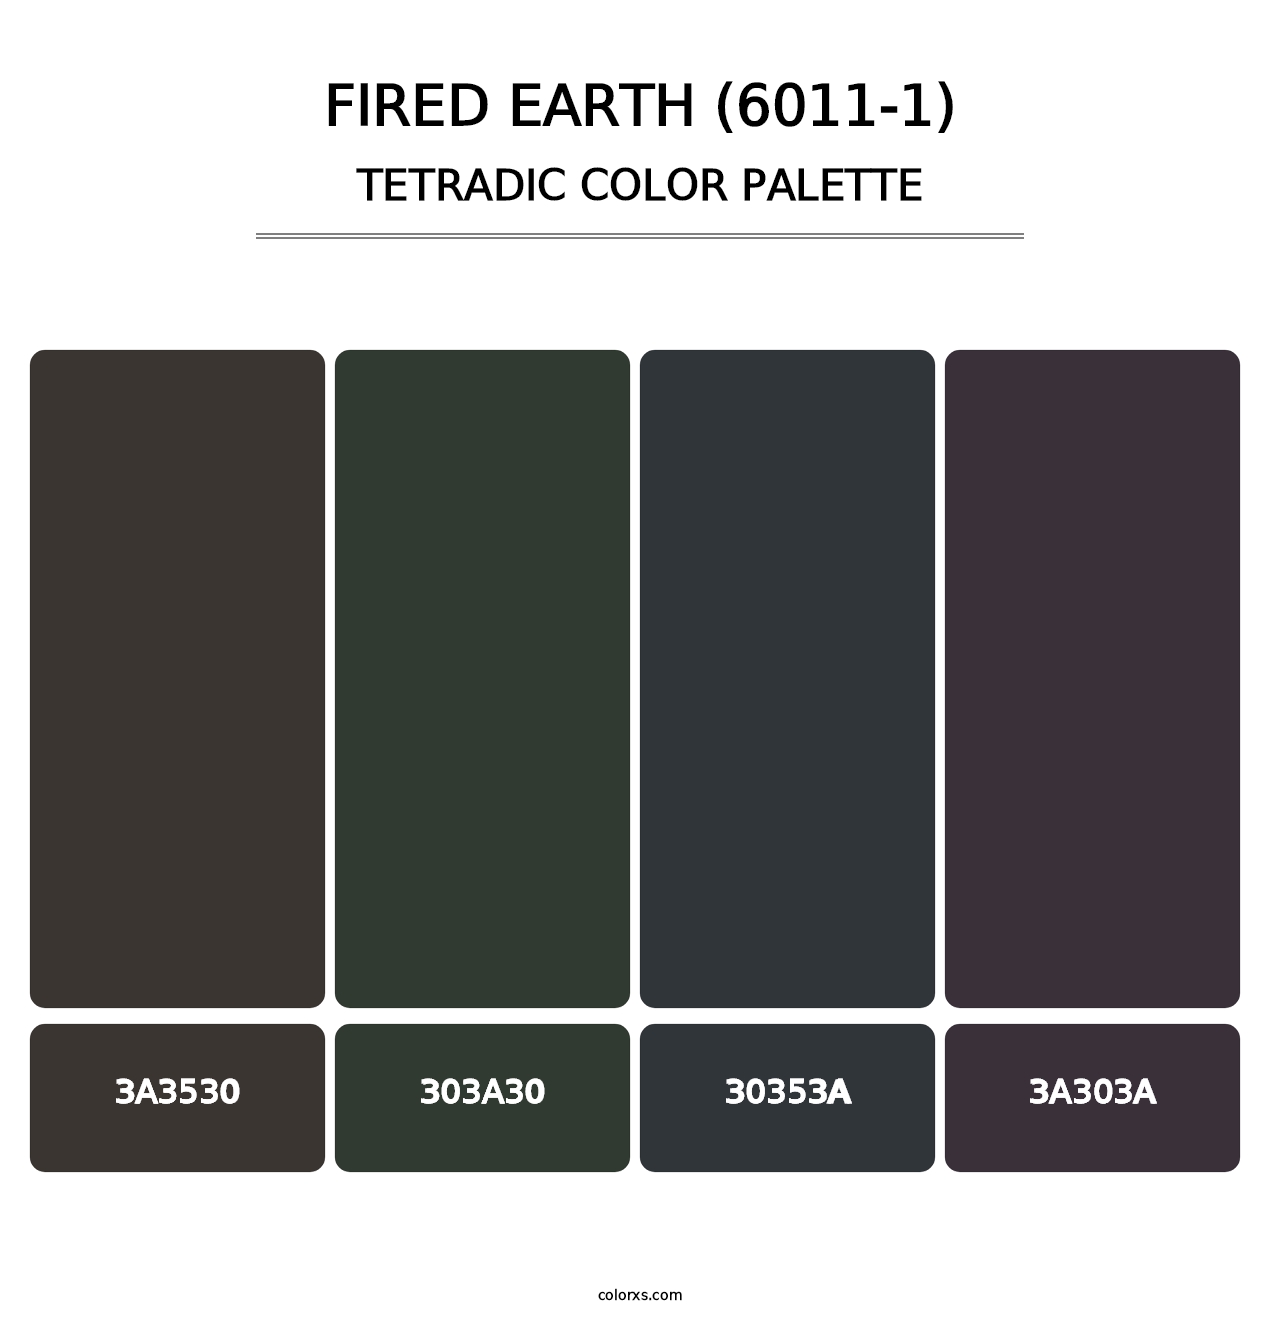 Fired Earth (6011-1) - Tetradic Color Palette